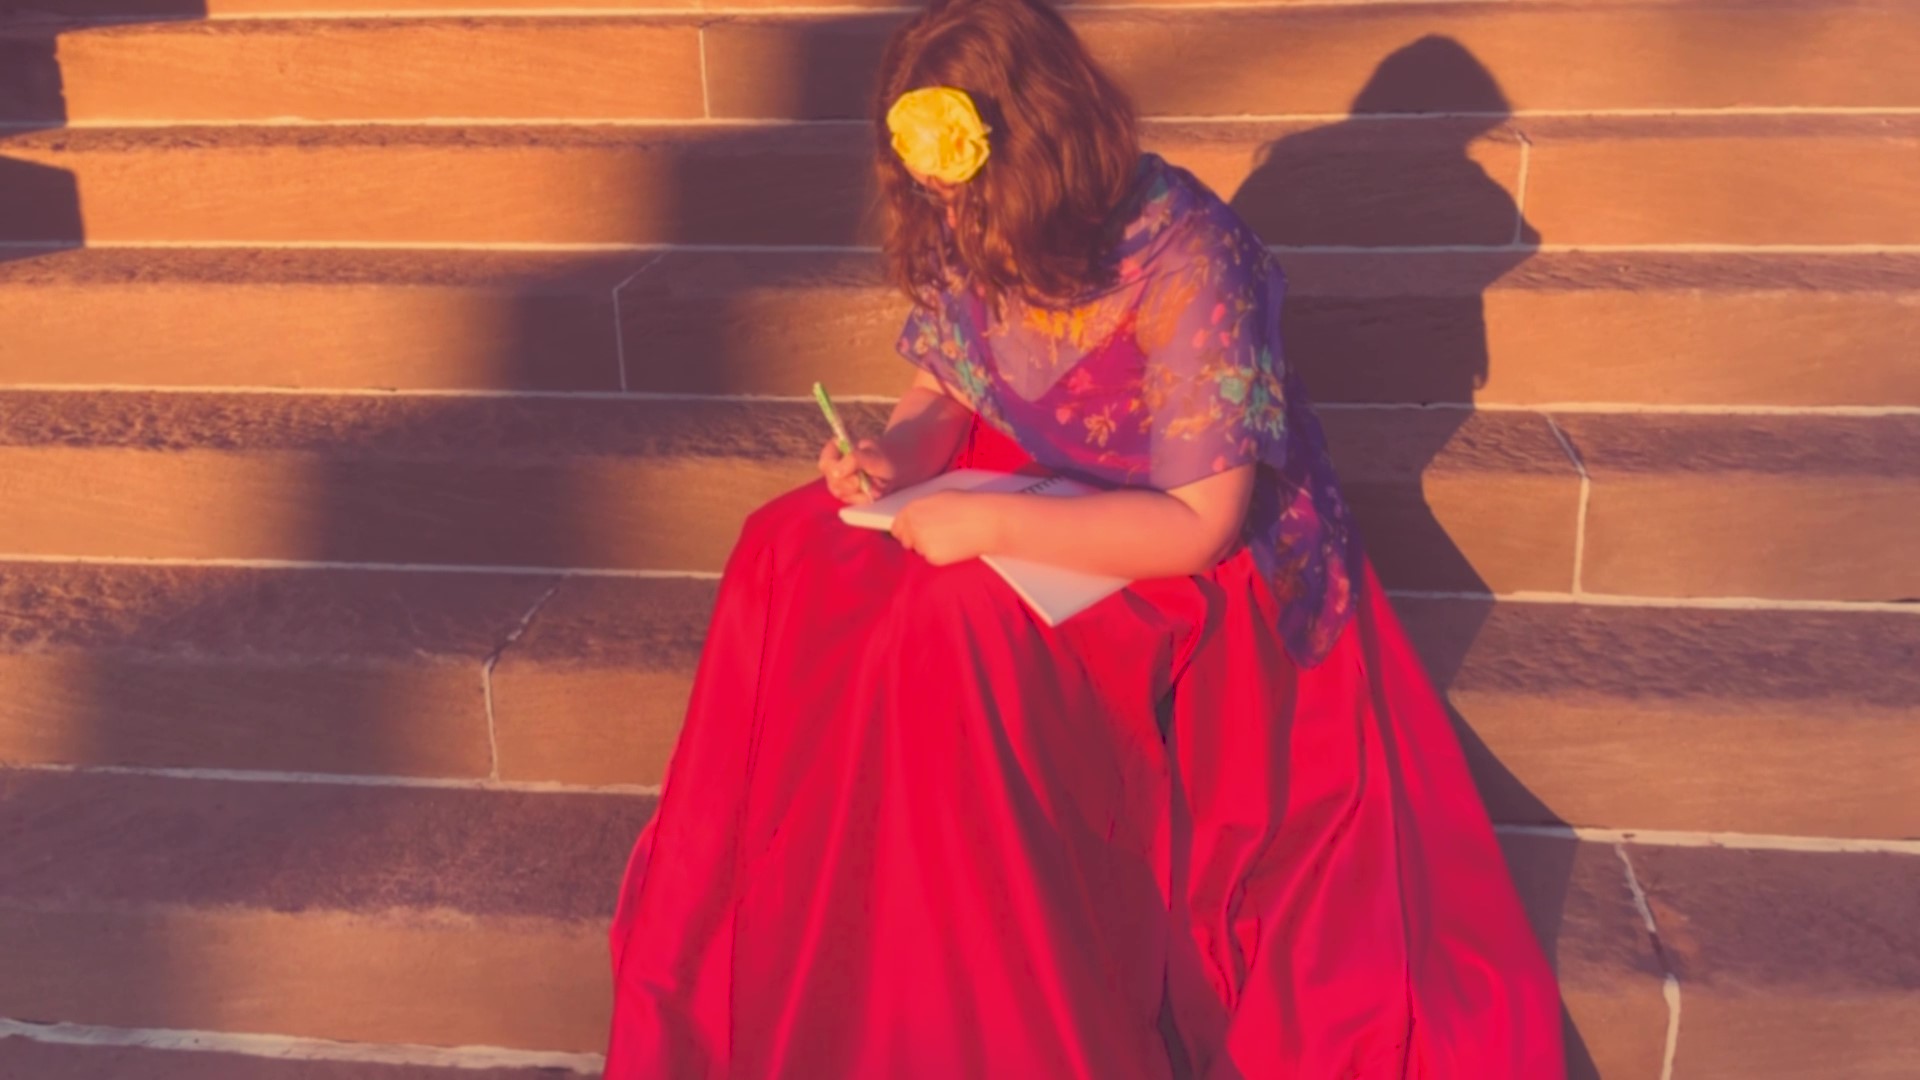 A person in a red dress sits writing on a flight of stairs outdoors. There is a yellow flower in their hair.